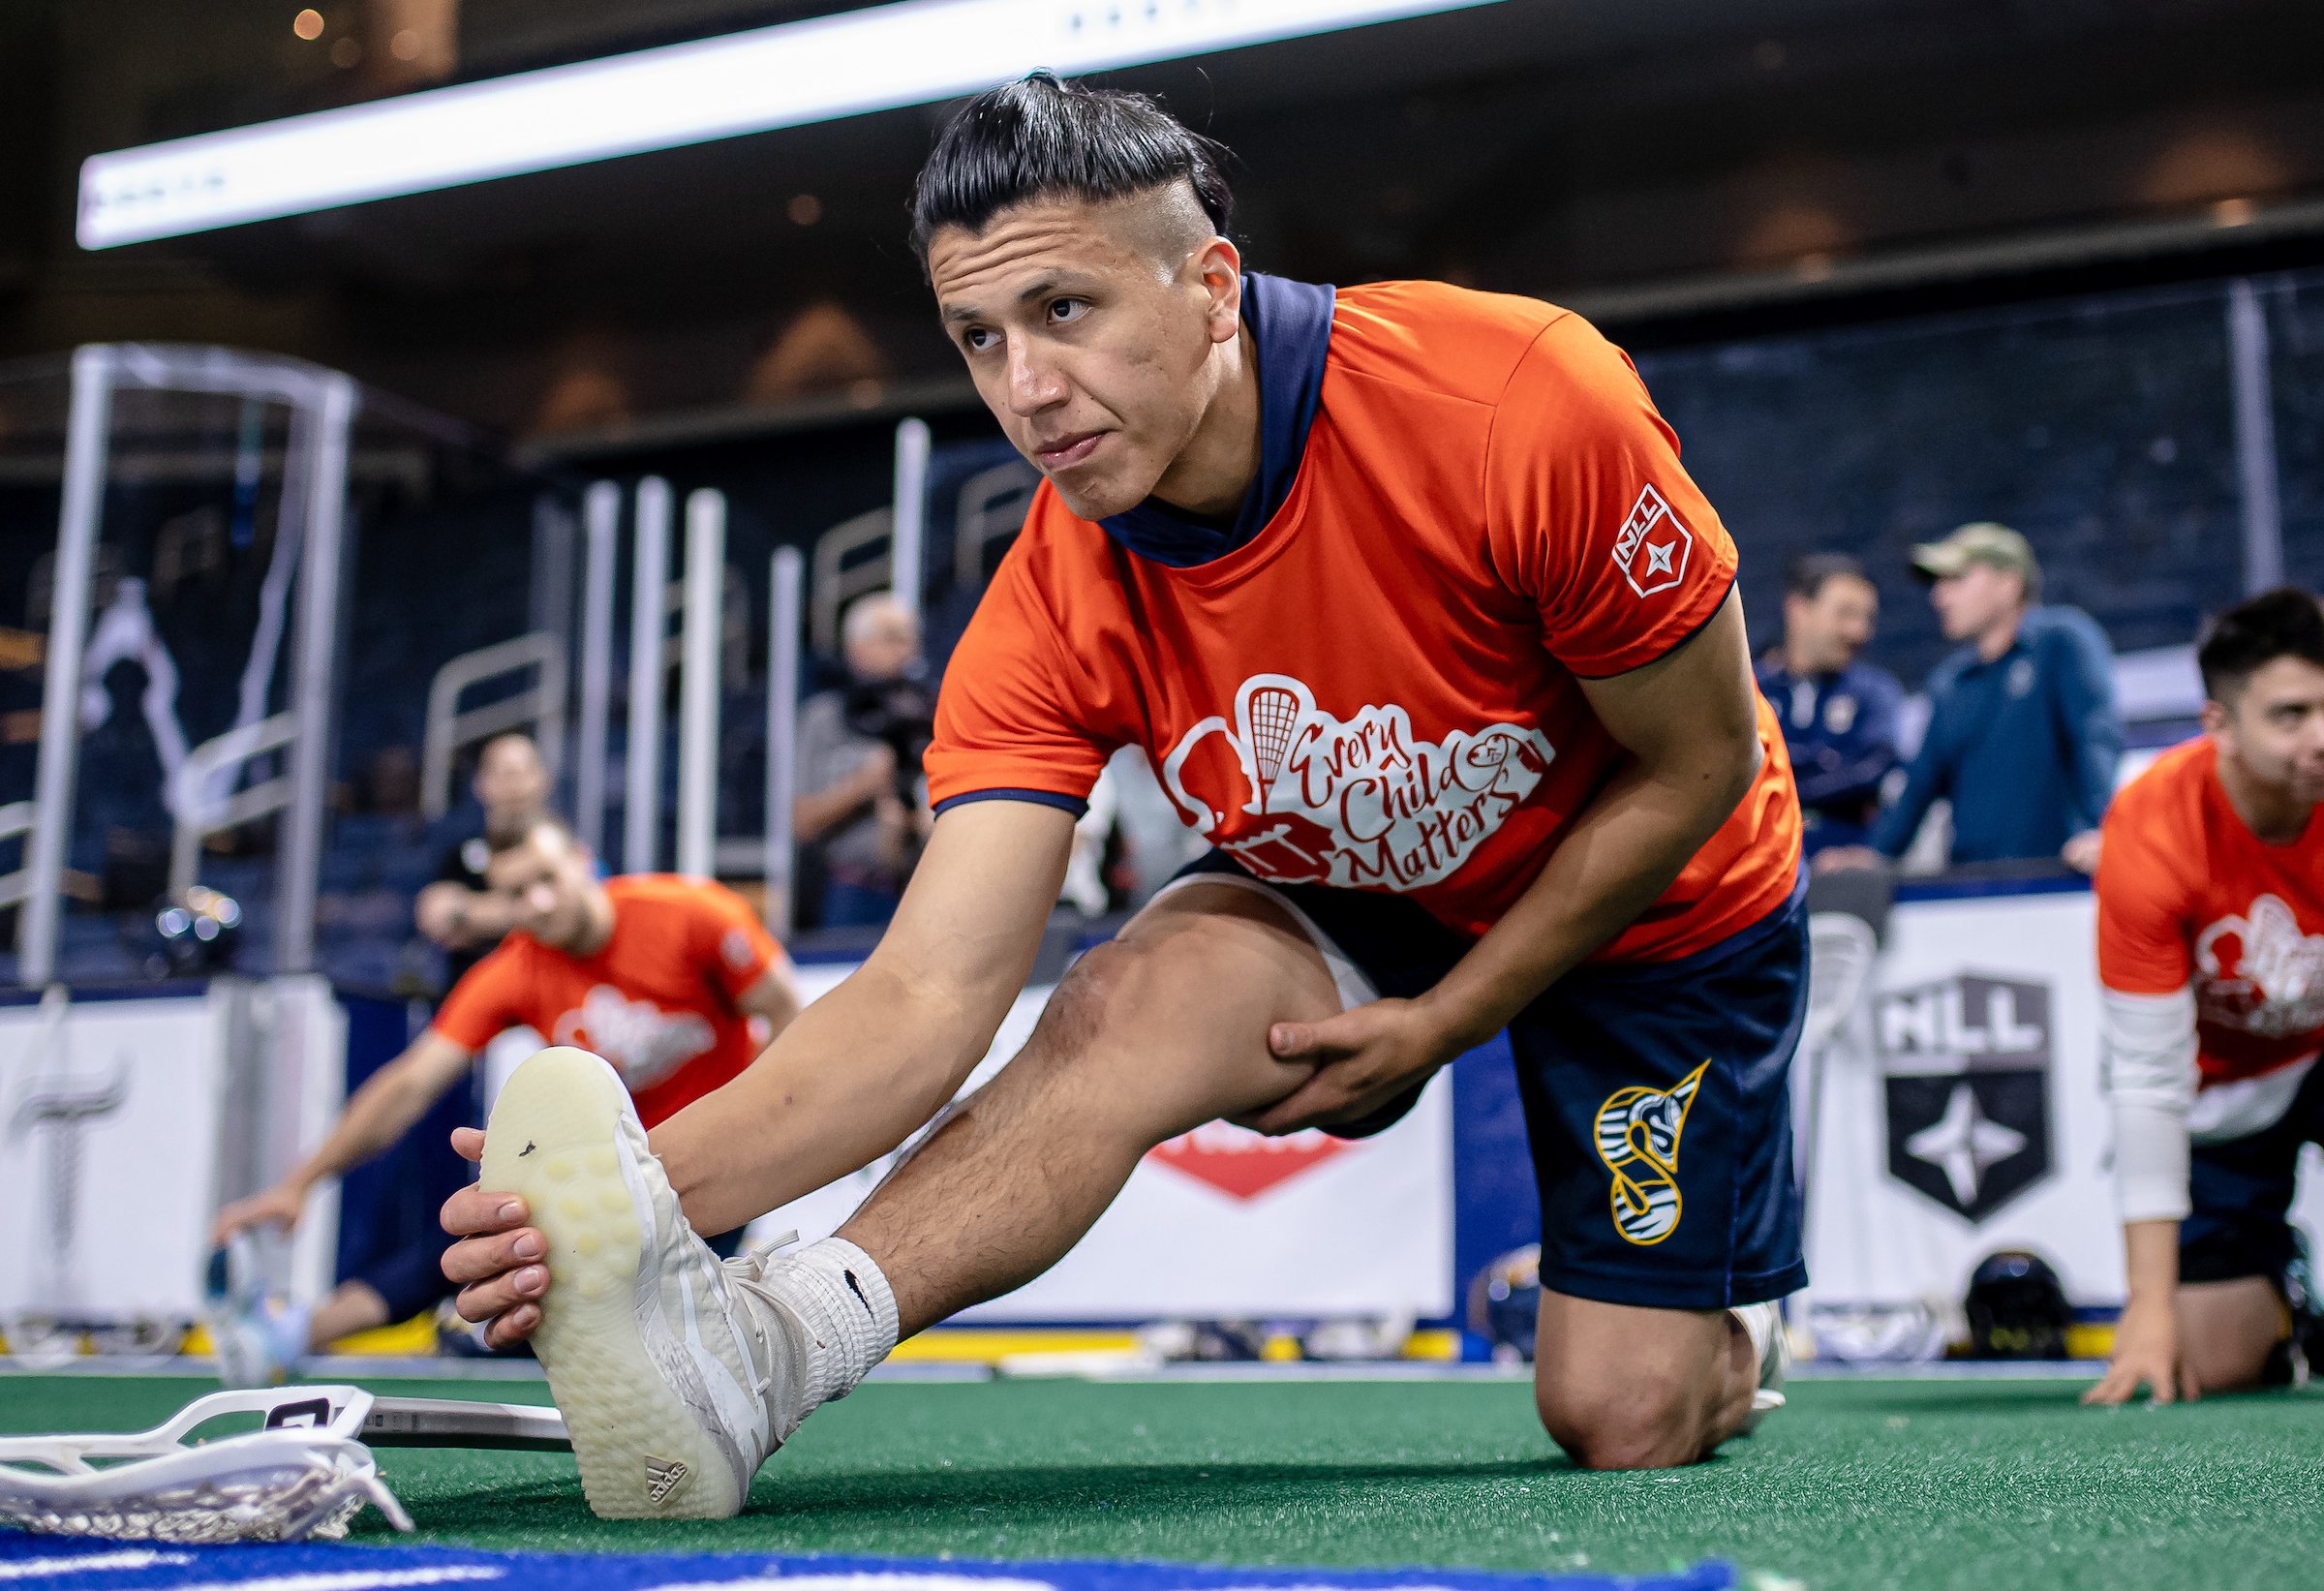 Lyle Thompson provides reasons why hes playing in Six Nations instead of the PLL this summer — The Lax Mag